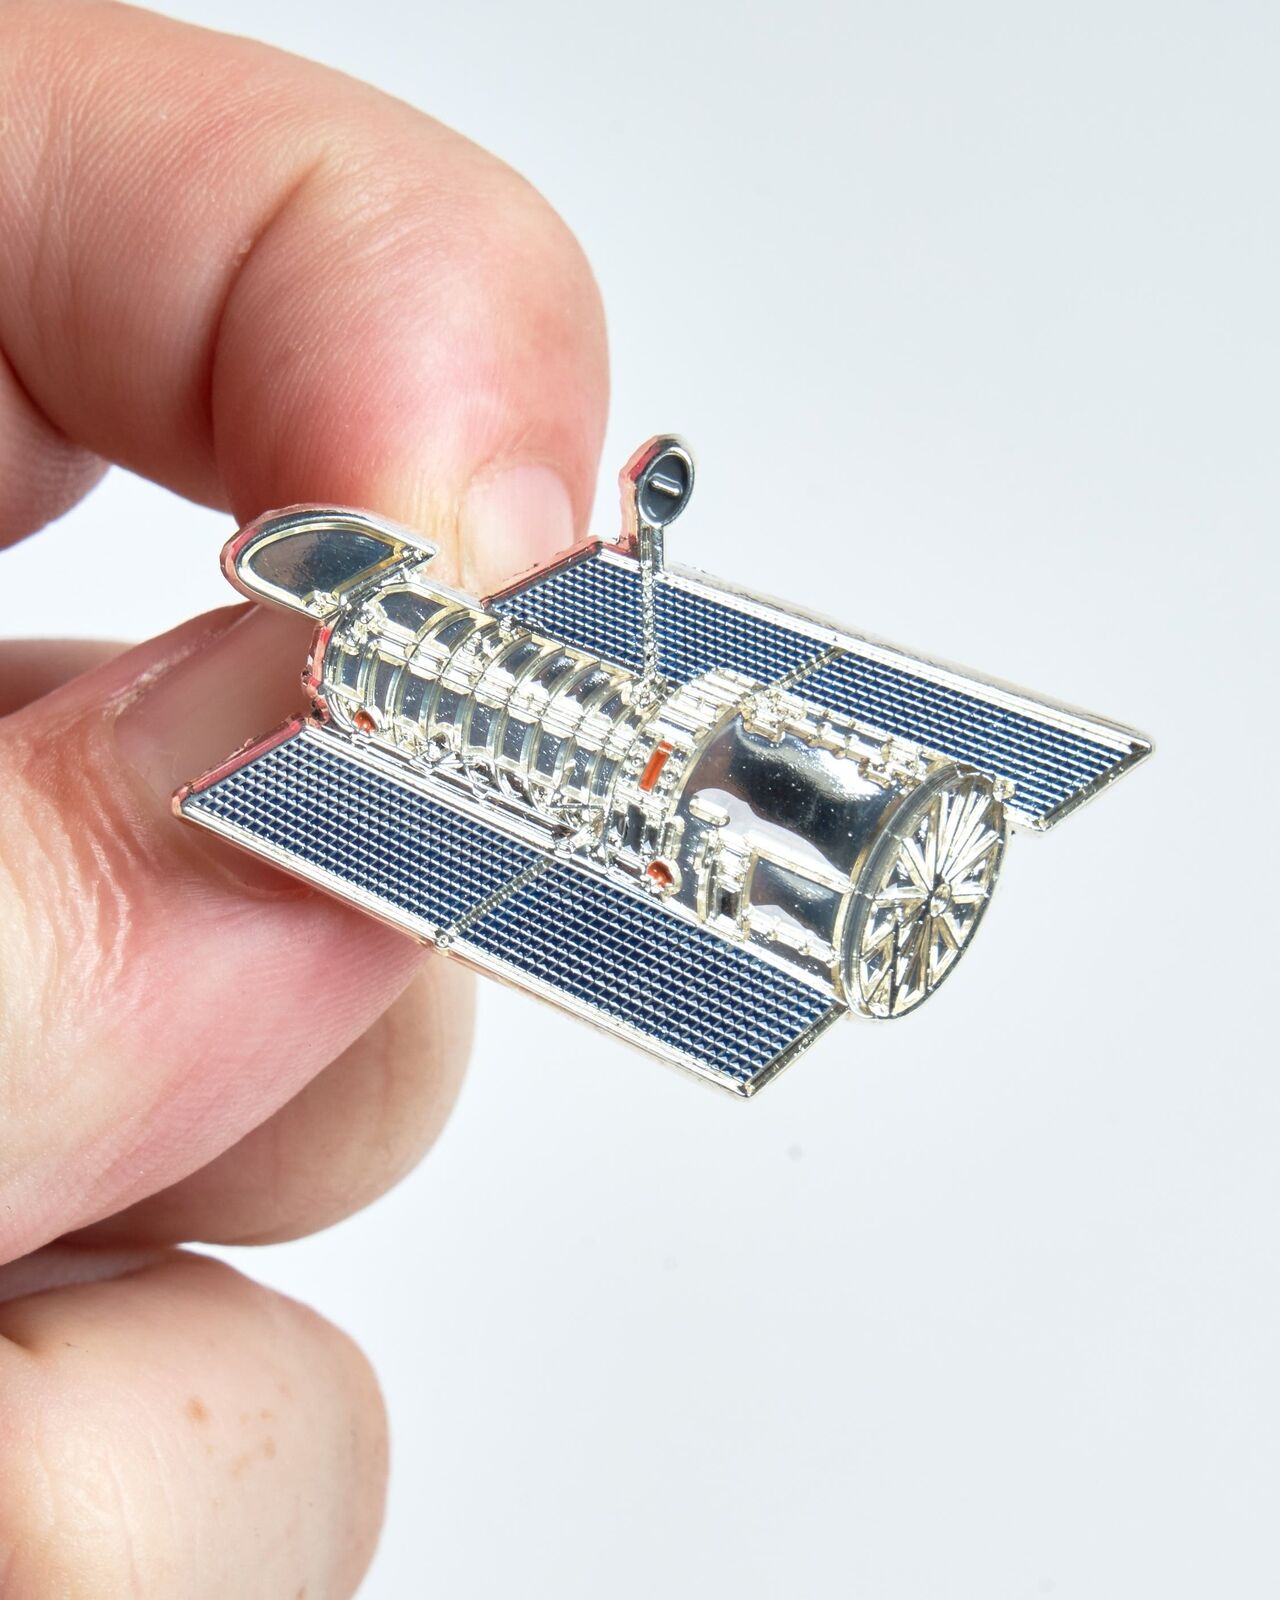 Astronomer Space Gift, Hubble Space Telescope Pin